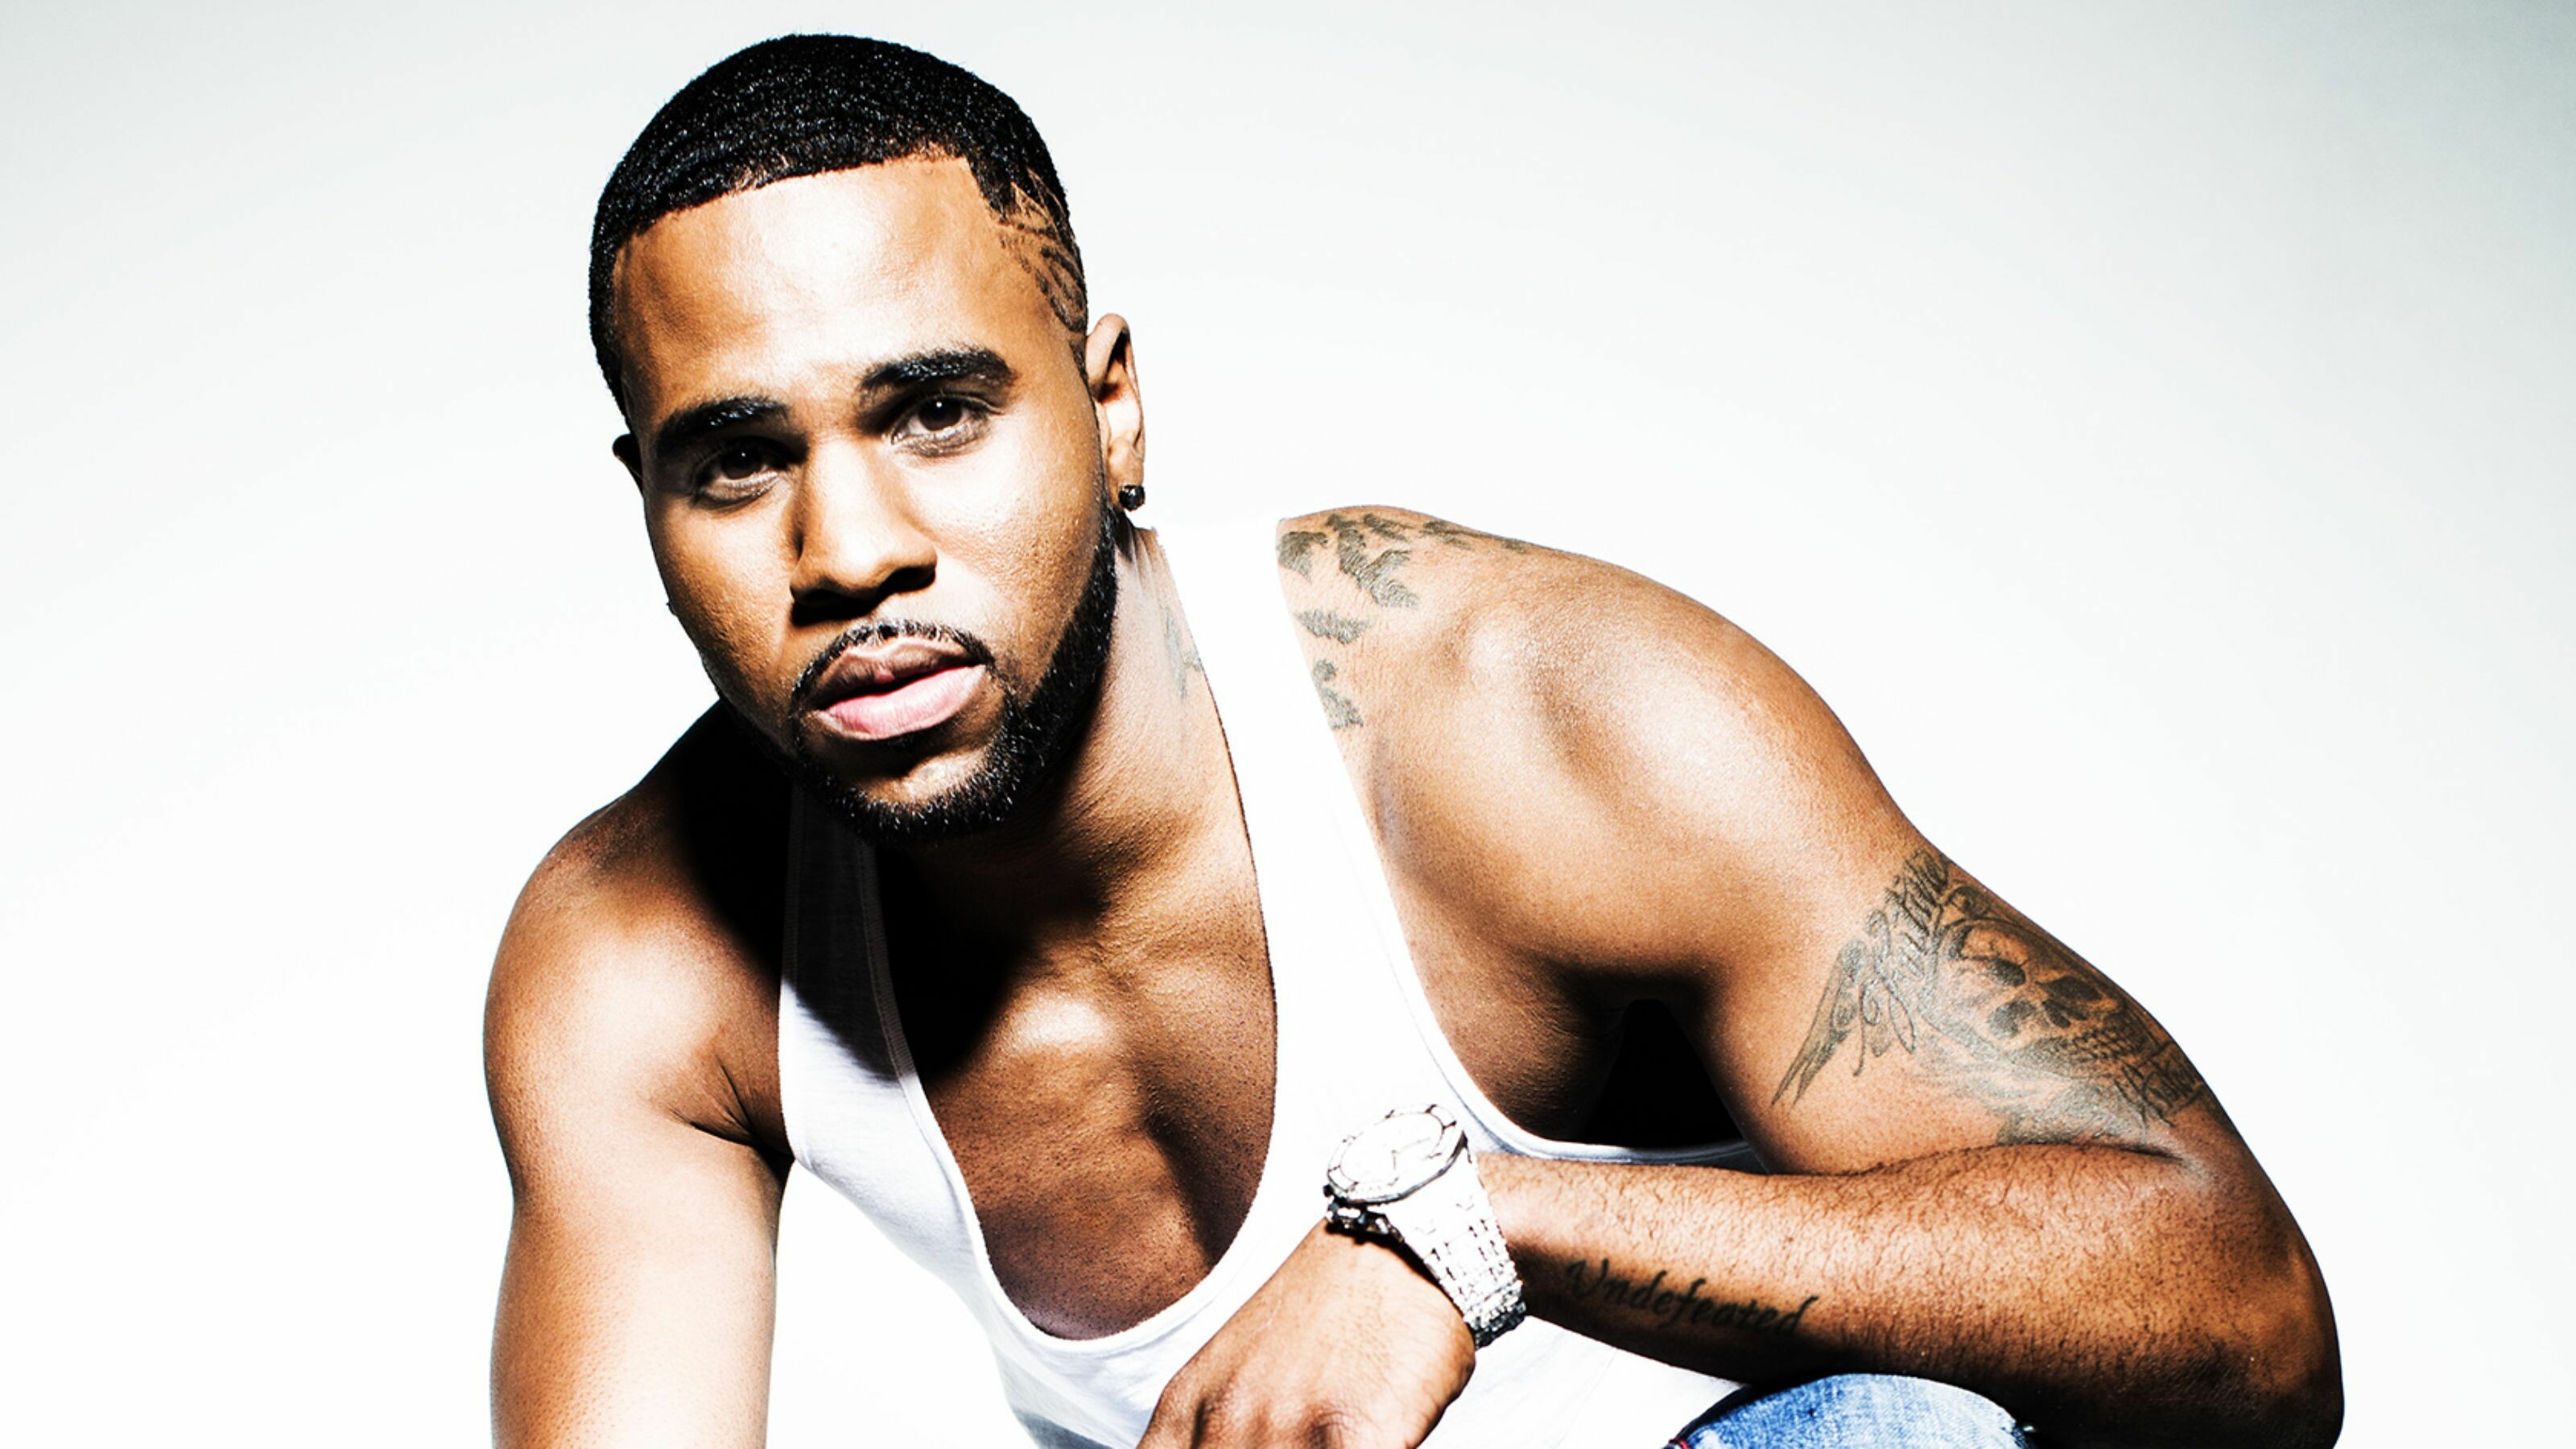 Jason Derulo: "Want to Want Me", was released as lead single on March 9, 2015. 3200x1800 HD Background.